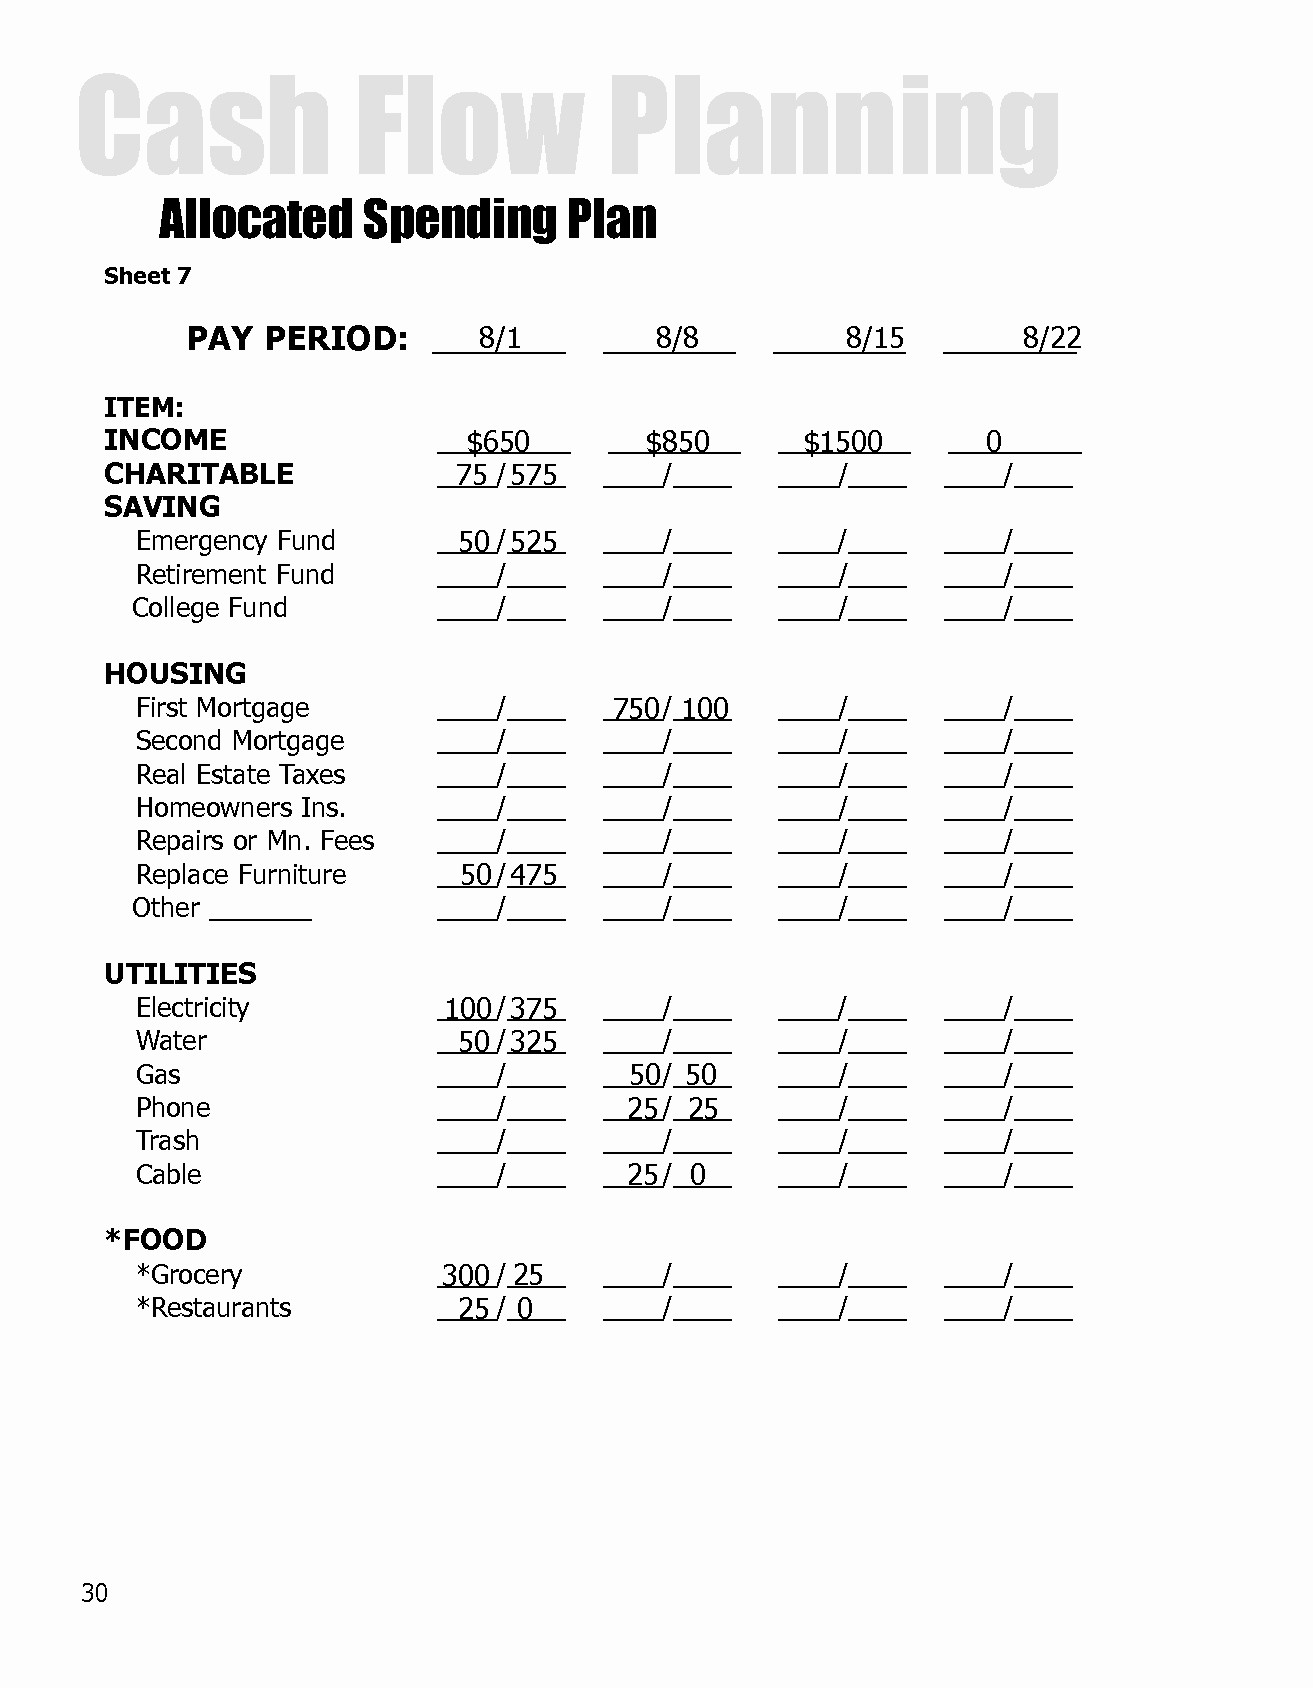 Financial Peace University Forms Form Templates Allocated Spending Document Dave Ramsey Plan Excel